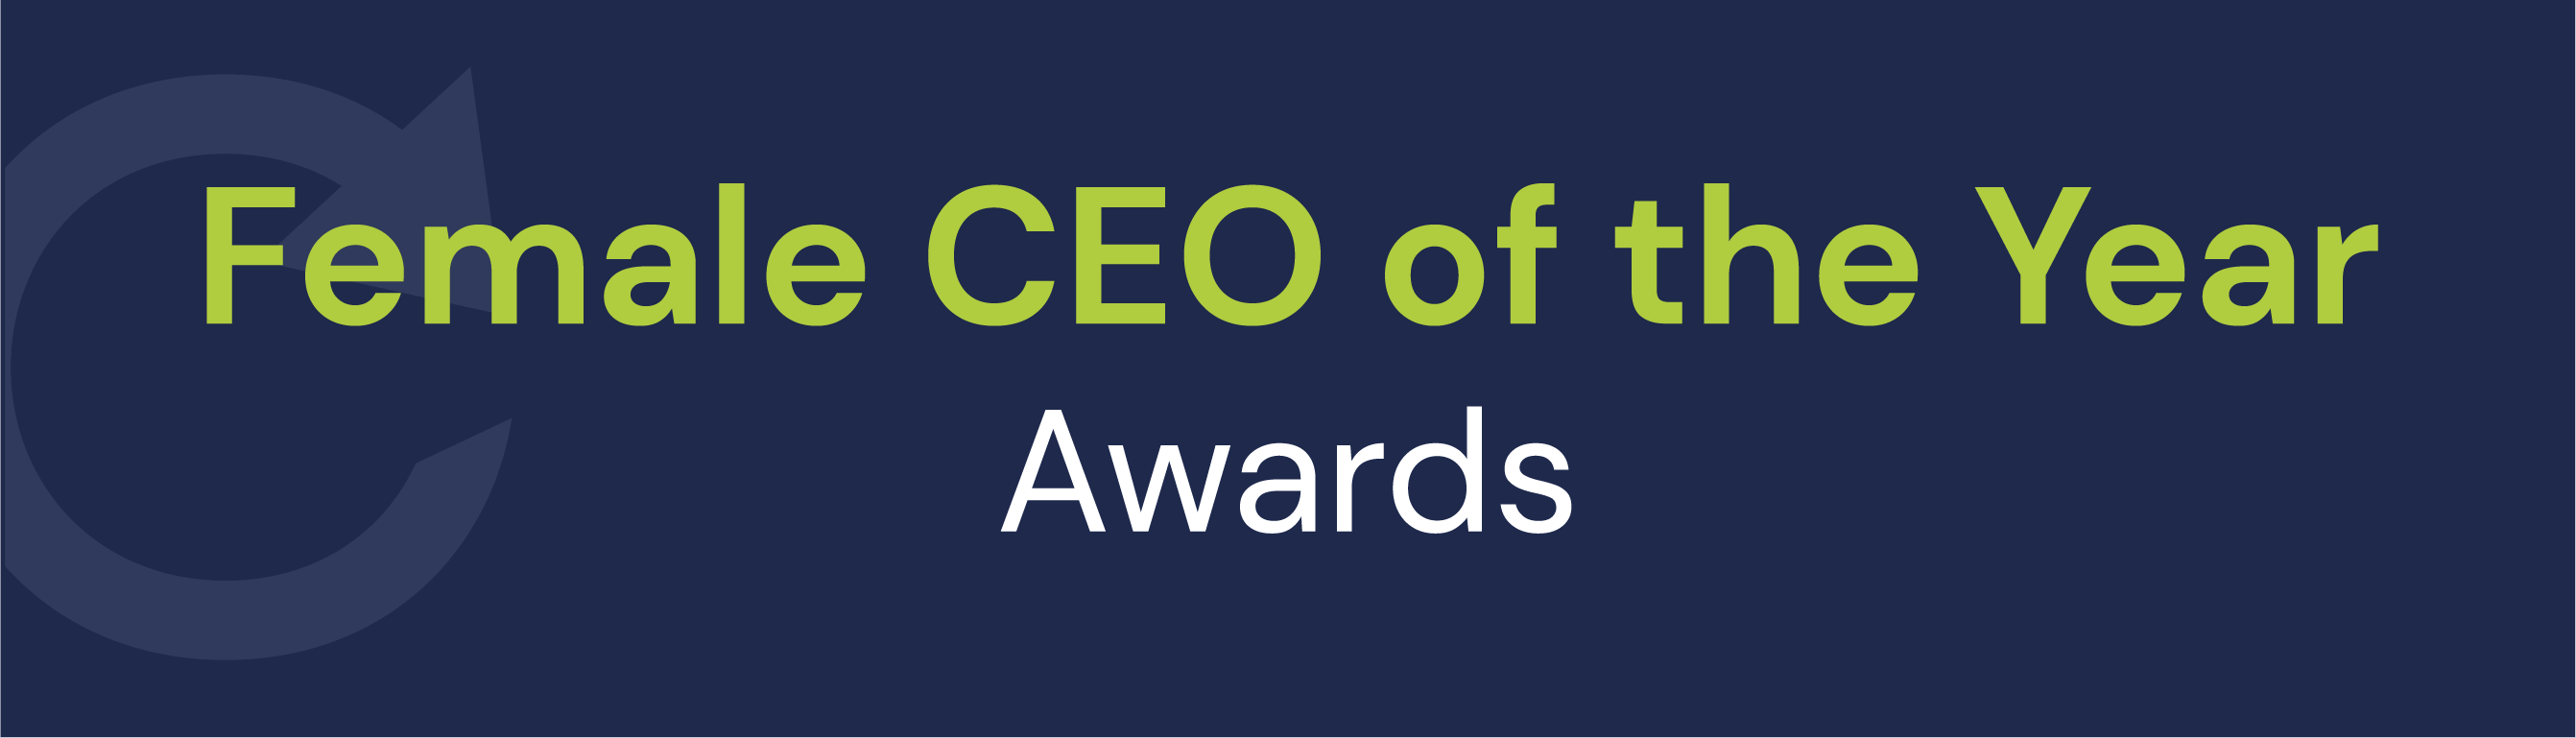 Female CEO of the Year Awards